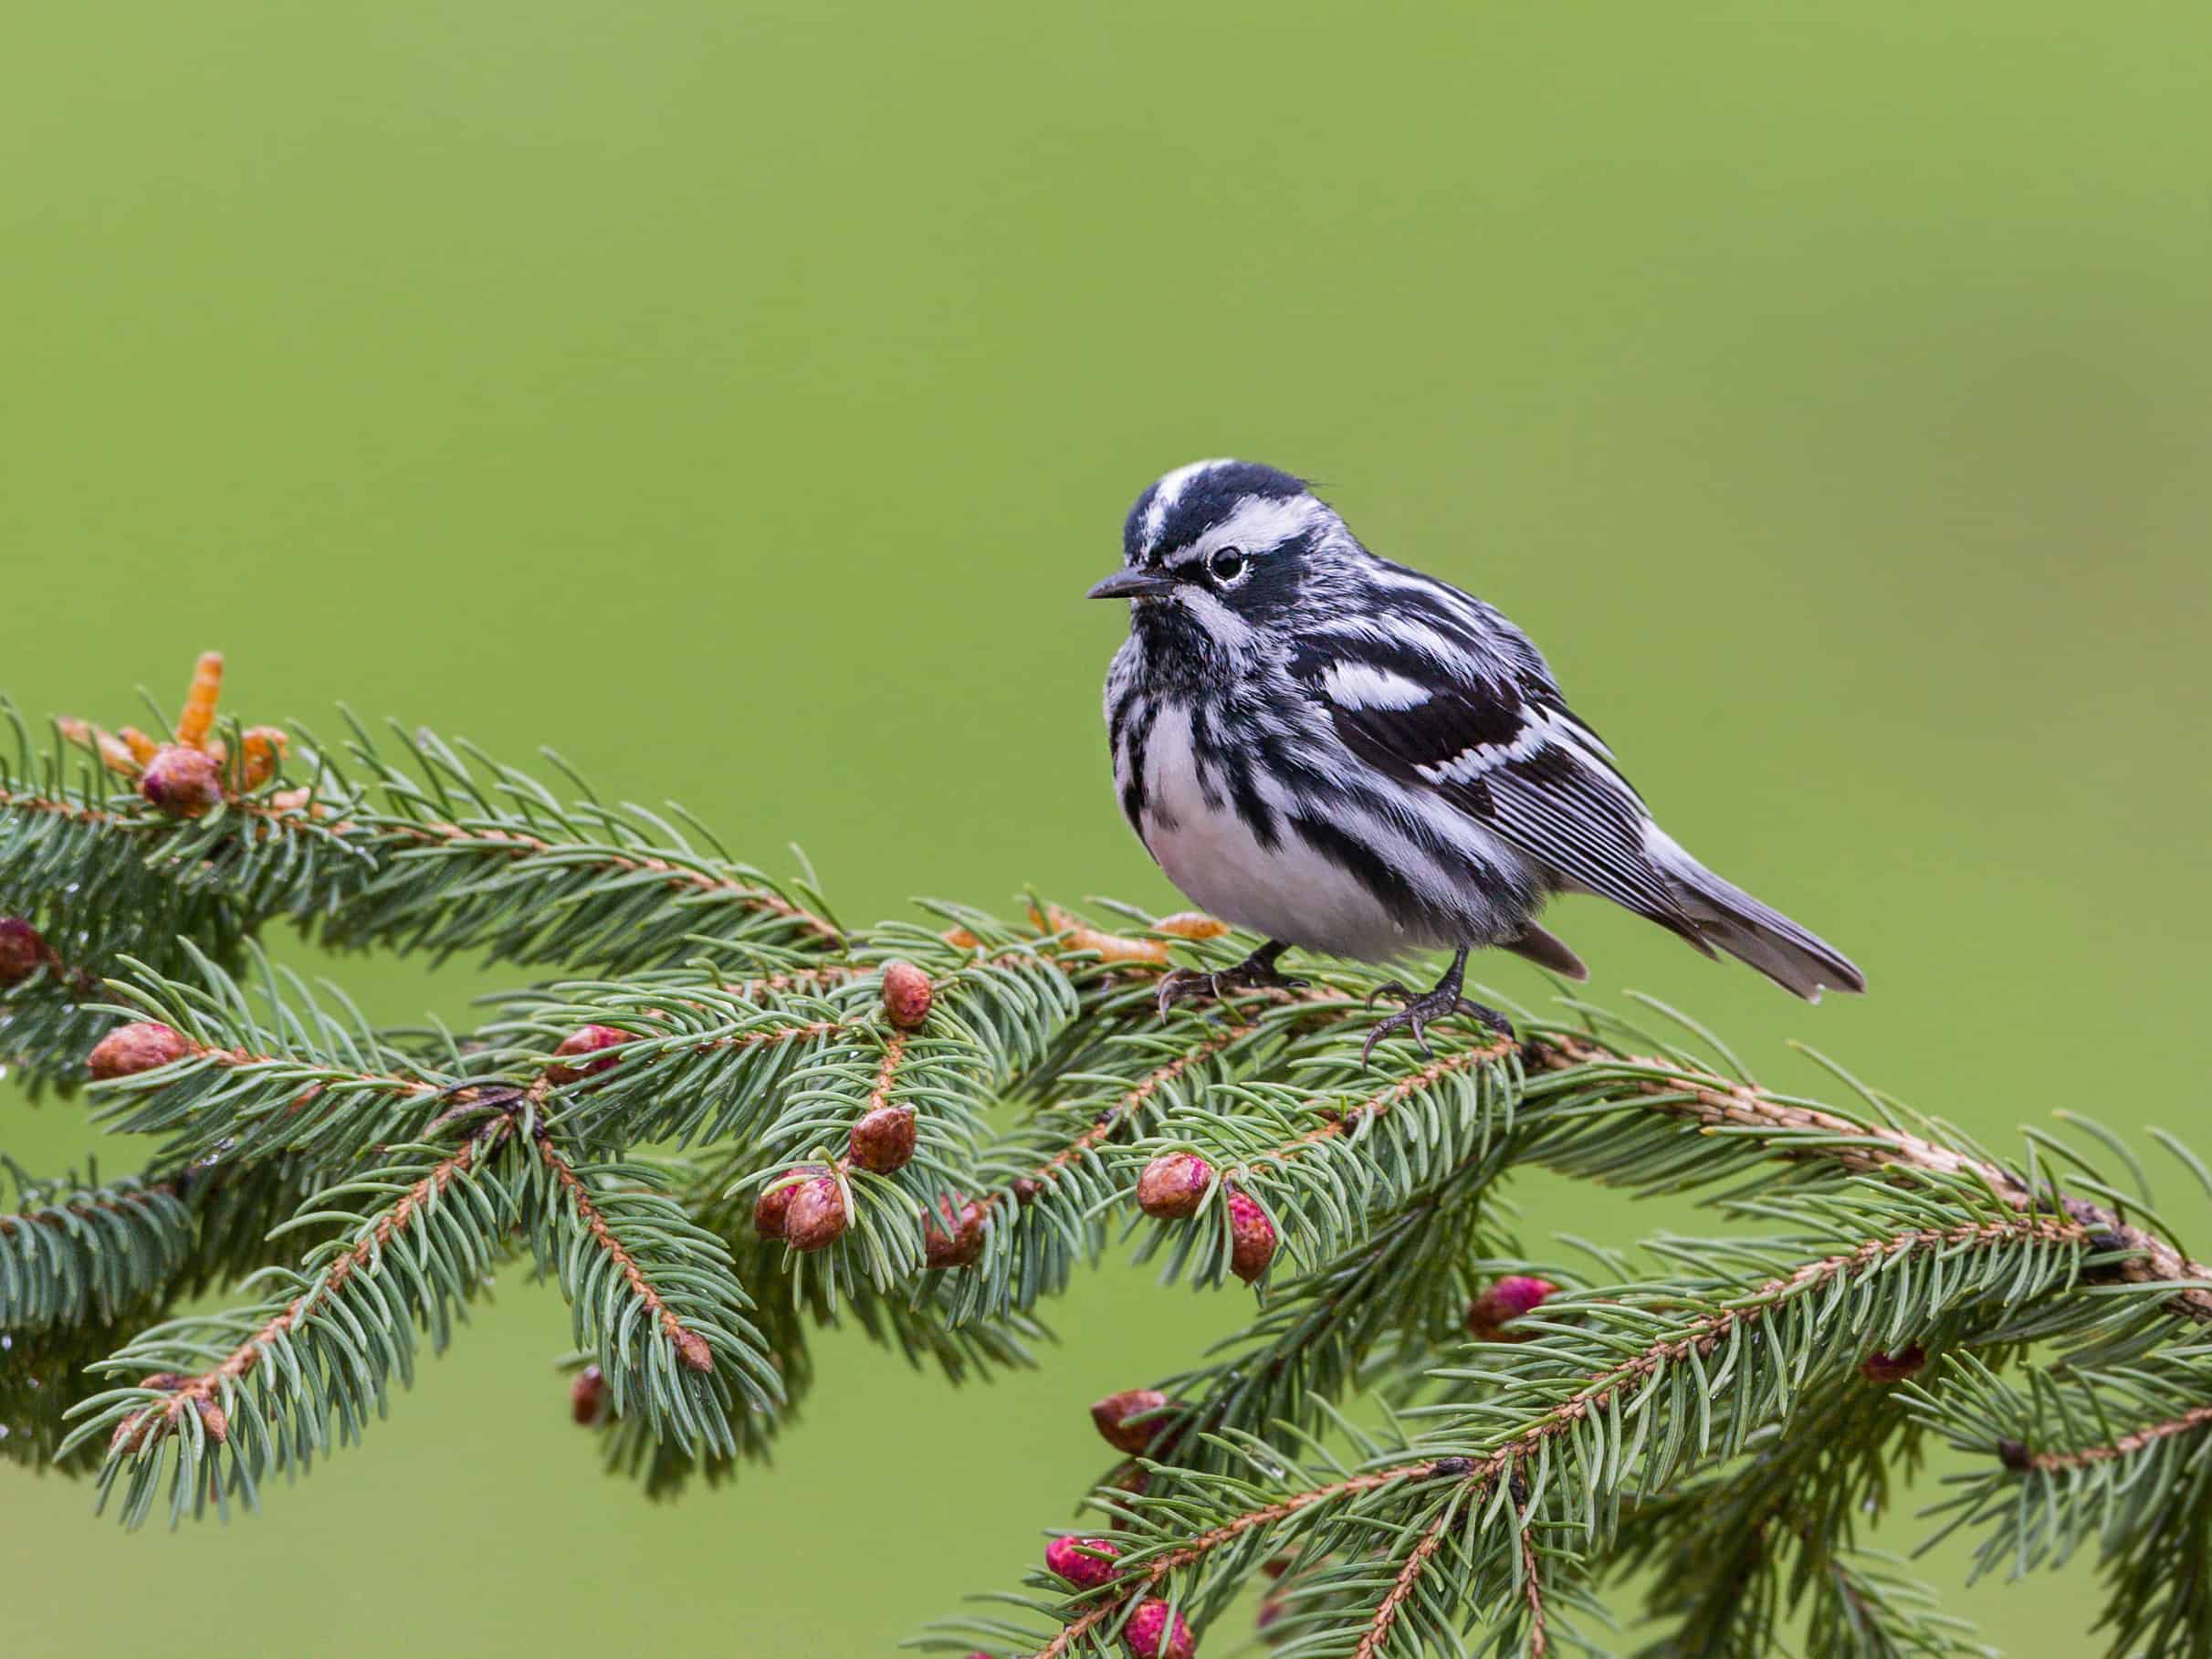 Black and white warbler perched on a pine tree against a green background